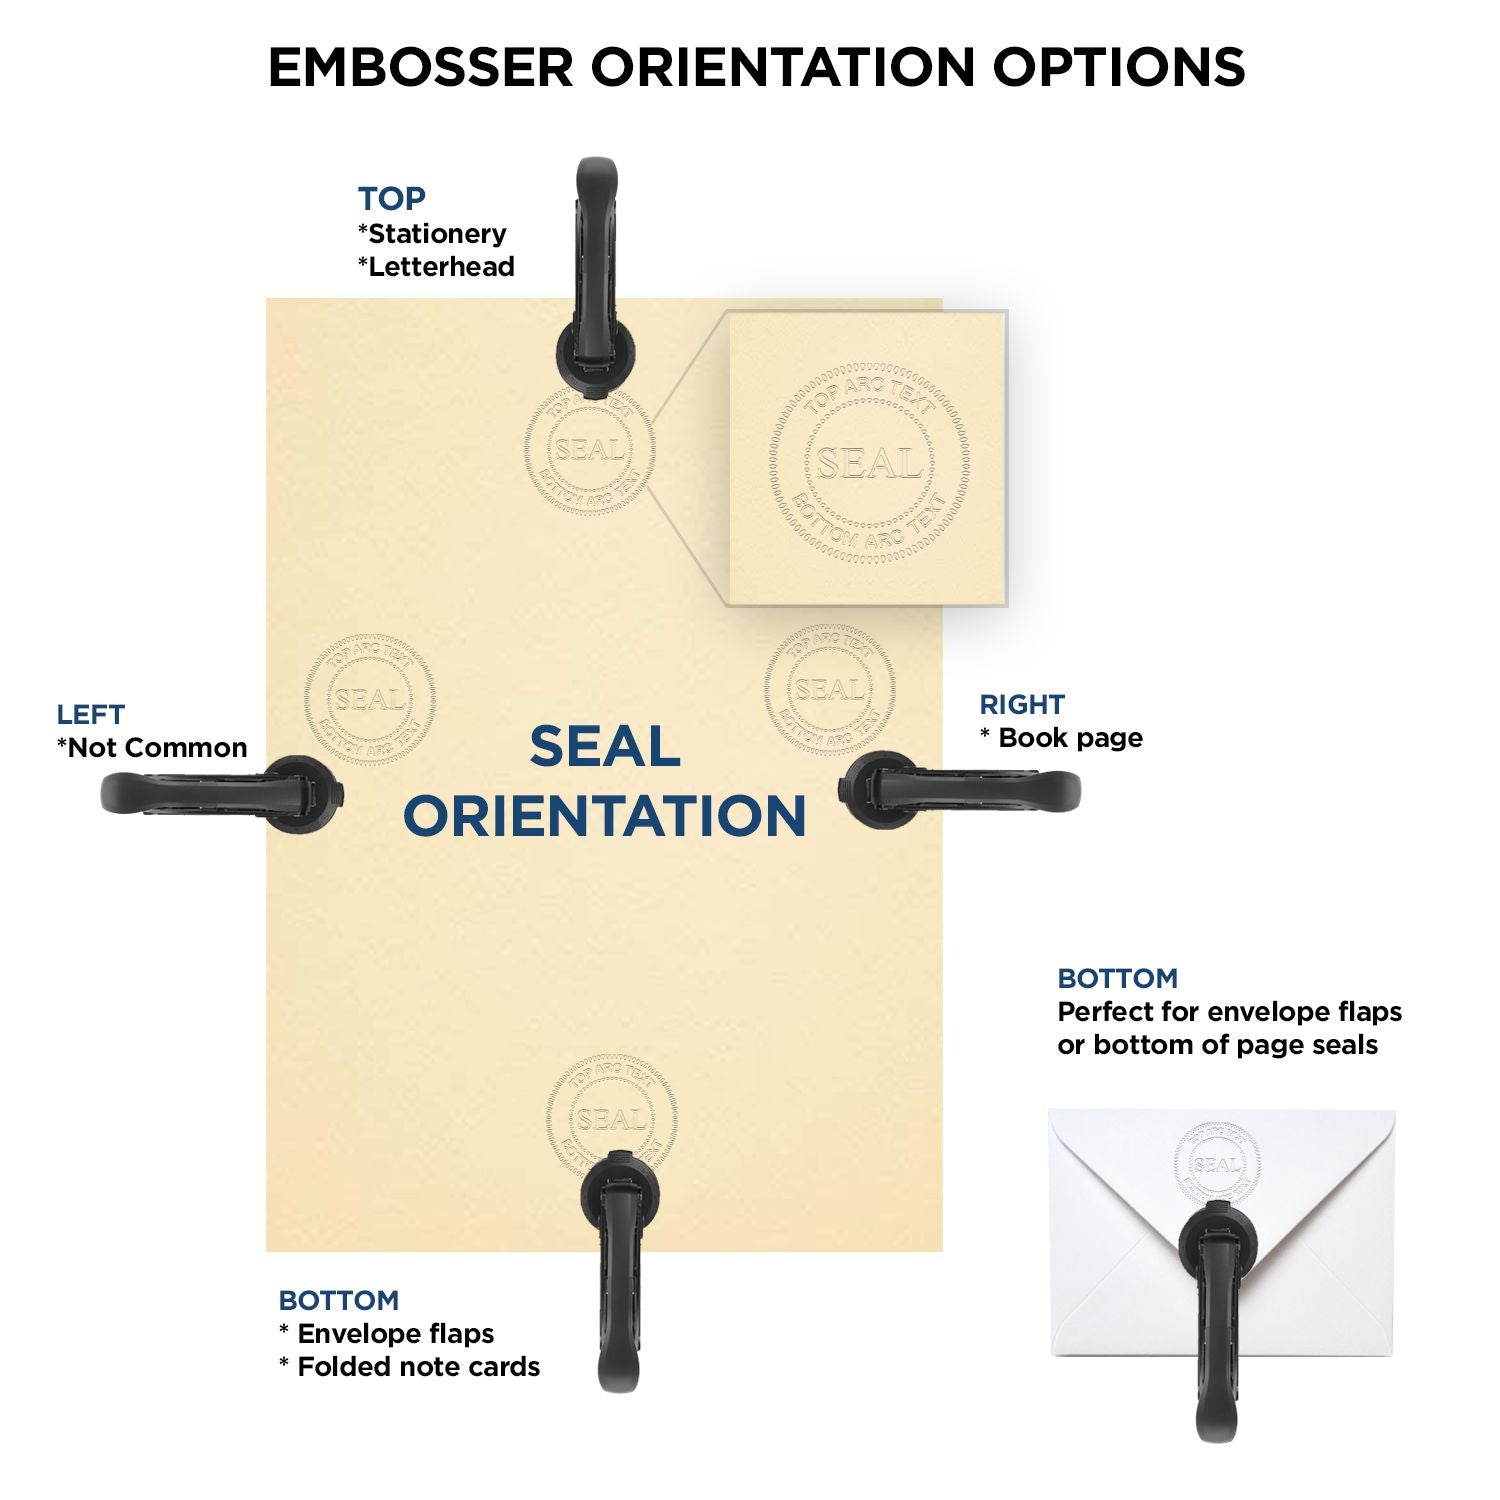 An infographic for the Heavy Duty Cast Iron New York Land Surveyor Seal Embosser showing embosser orientation, this is showing examples of a top, bottom, right and left insert.